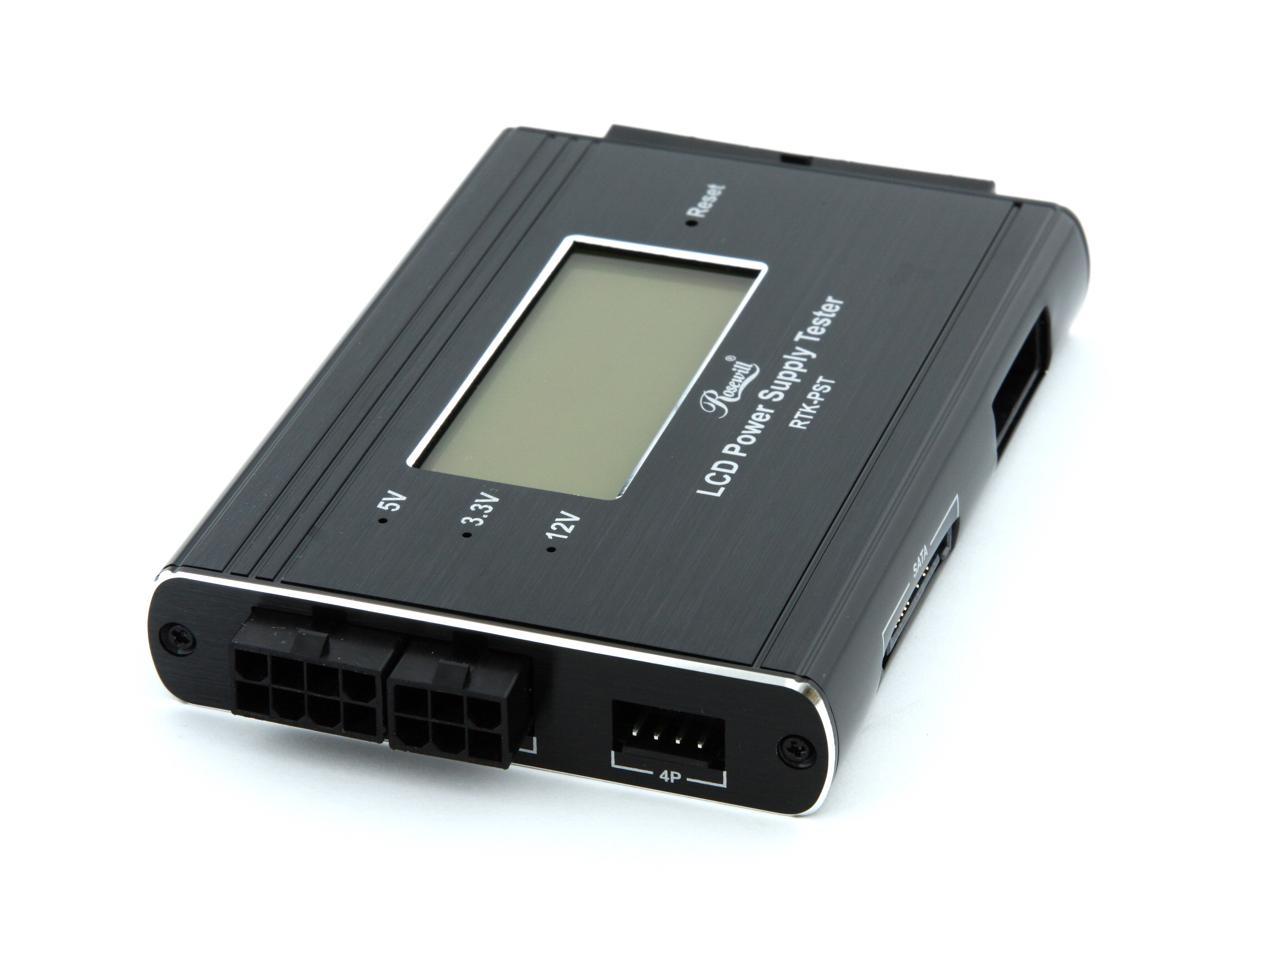 Rosewill Digital LCD Power Supply Tester RTK-PST